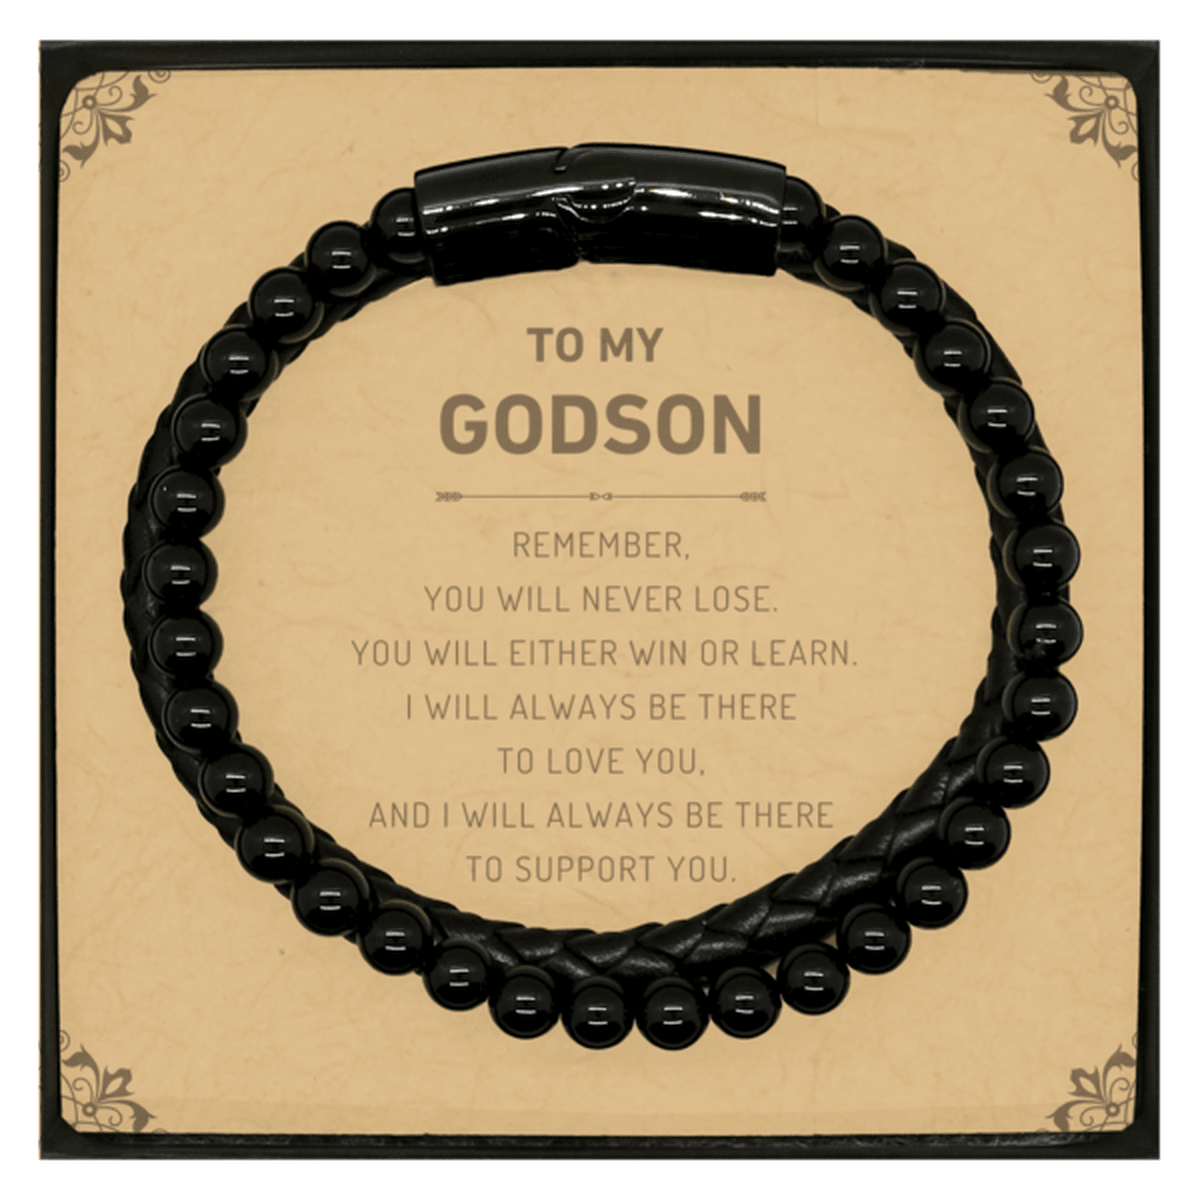 Godson Gifts, To My Godson Remember, you will never lose. You will either WIN or LEARN, Keepsake Stone Leather Bracelets For Godson Card, Birthday Christmas Gifts Ideas For Godson X-mas Gifts